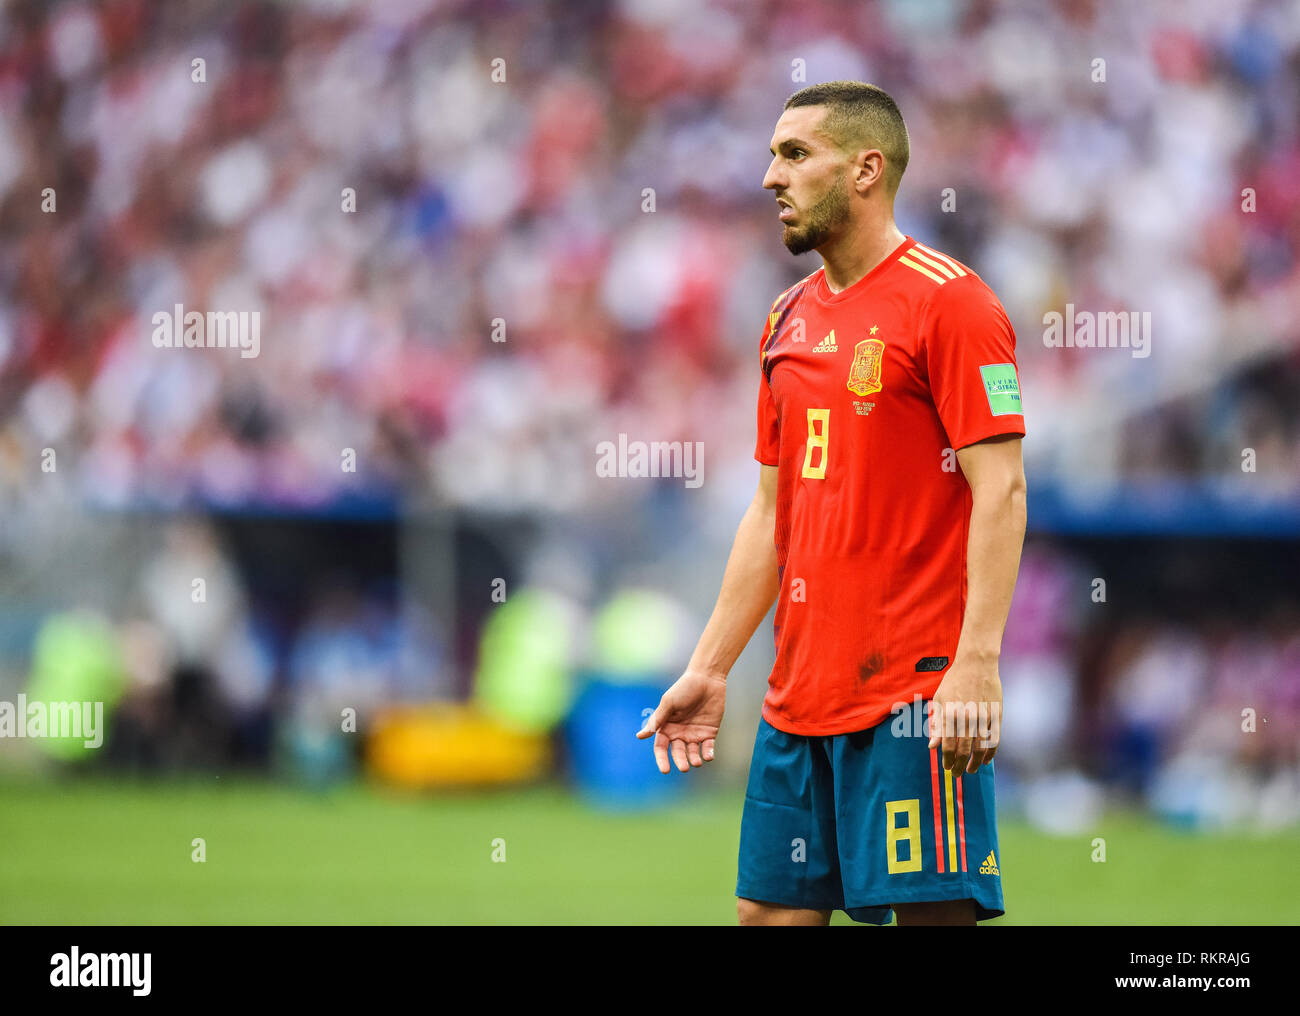 Moscow, Russia - July 1, 2018. Spain national football team midfielder Koke during FIFA World Cup 2018 Round of 16 match Spain vs Russia. Stock Photo